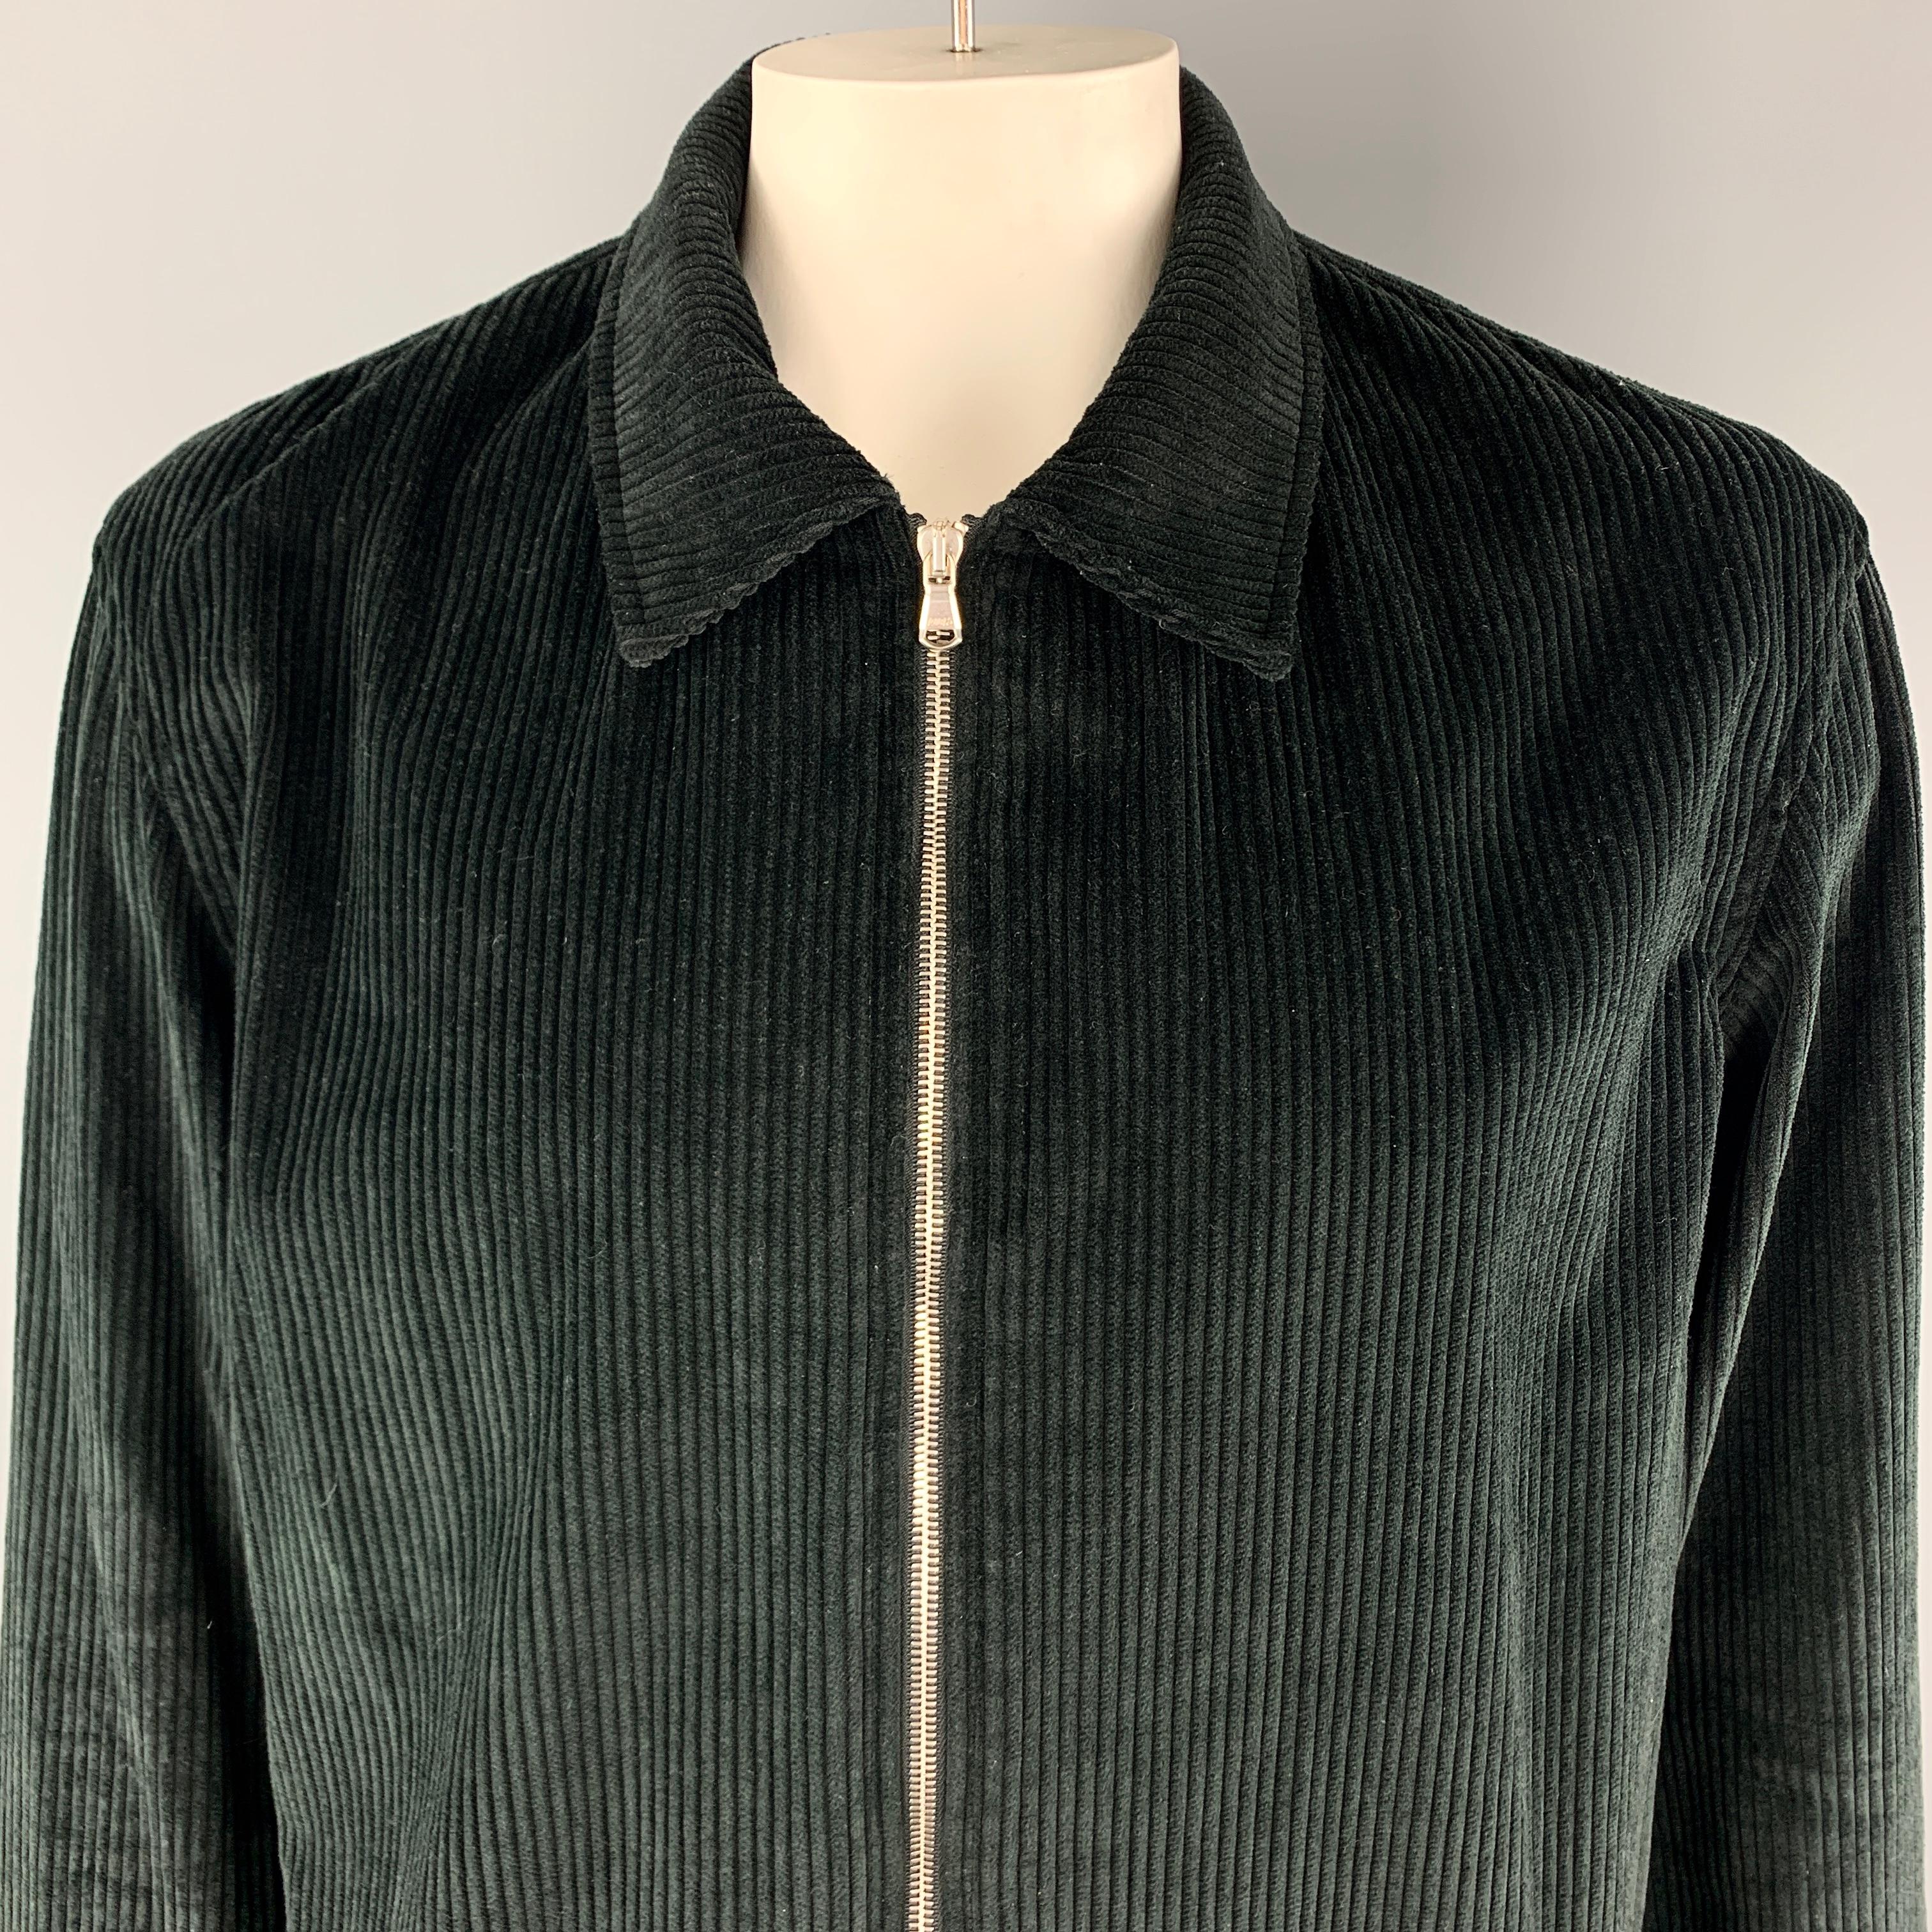 DEVEAUX New York Jacket comes in a solid black corduroy material, with a zip closure, single breasted, belted cuffs, unlined. Made in USA.

Excellent Pre-Owned Condition.
Marked: US 3

Measurements:

Shoulder: 20.5 in. 
Chest: 52 in. 
Sleeve: 26.5